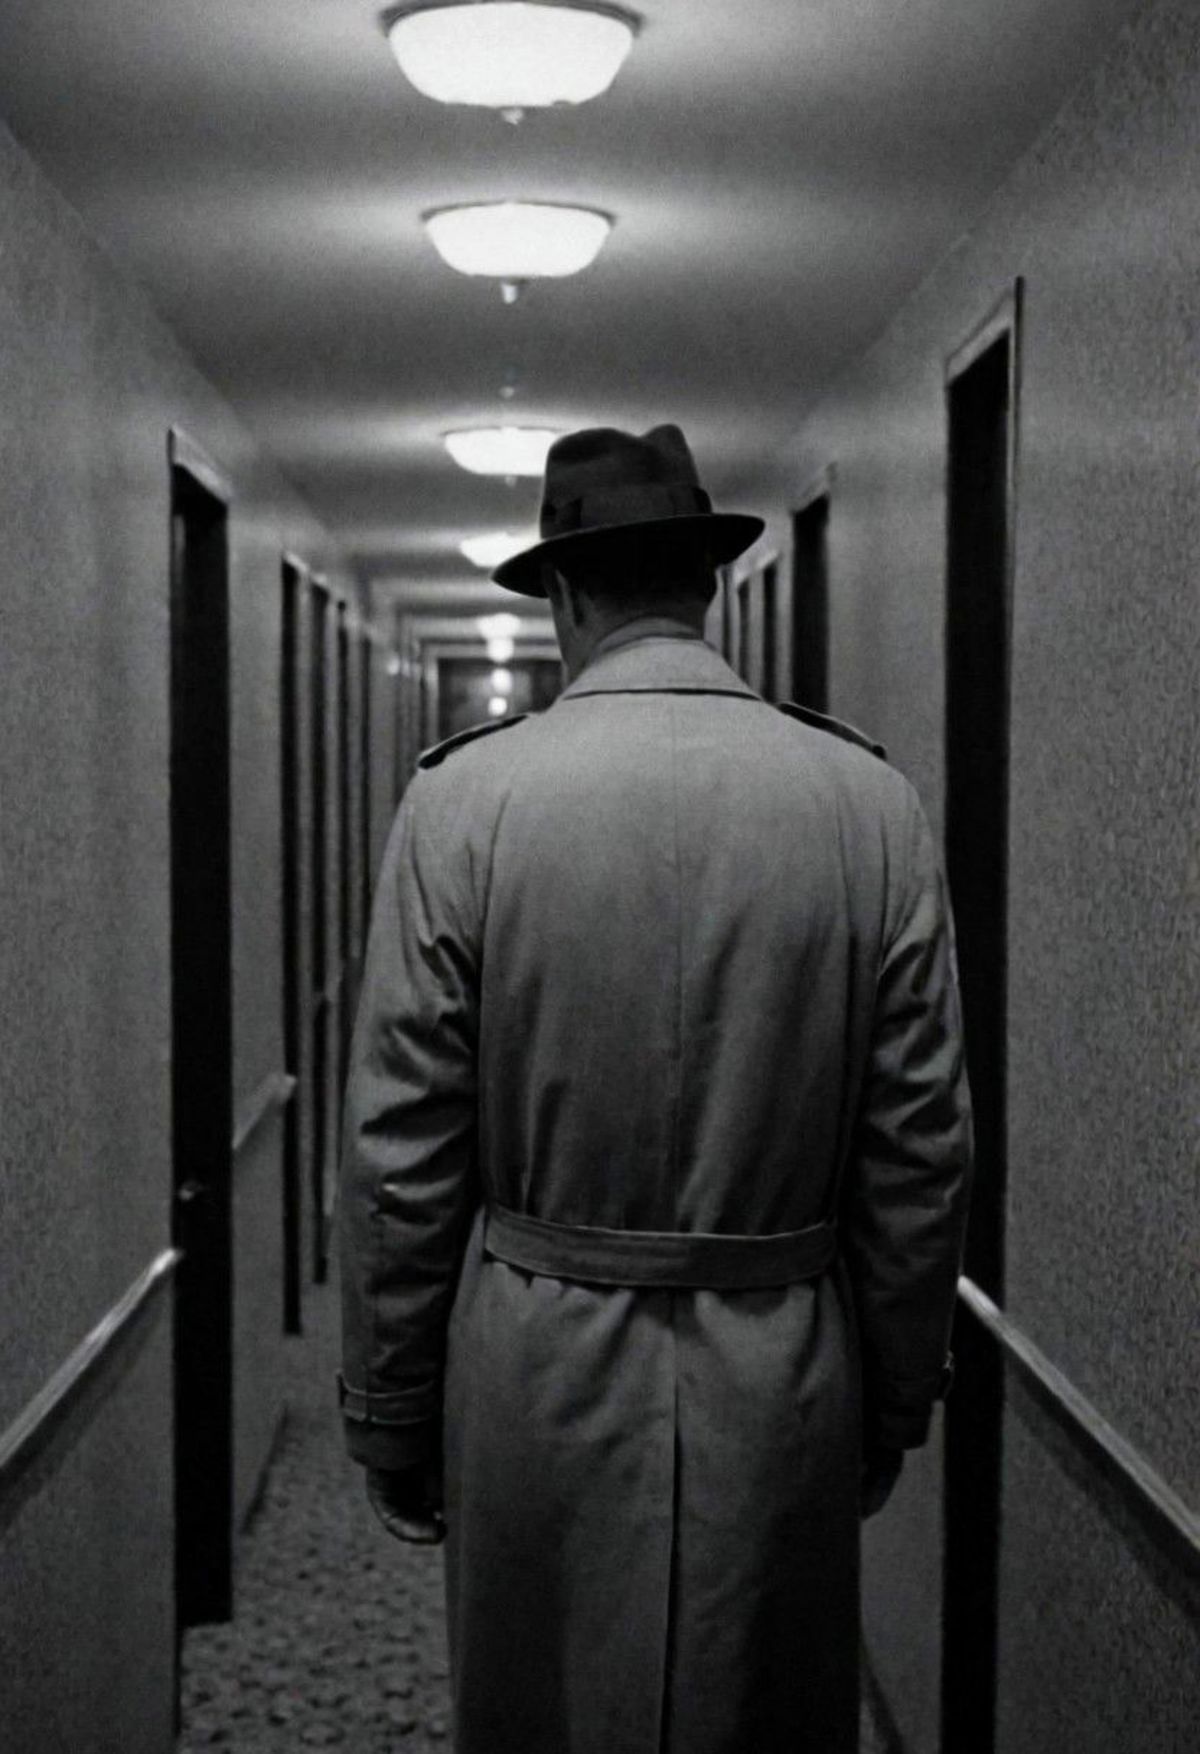 A man wearing a trench coat and hat walking down a hallway.